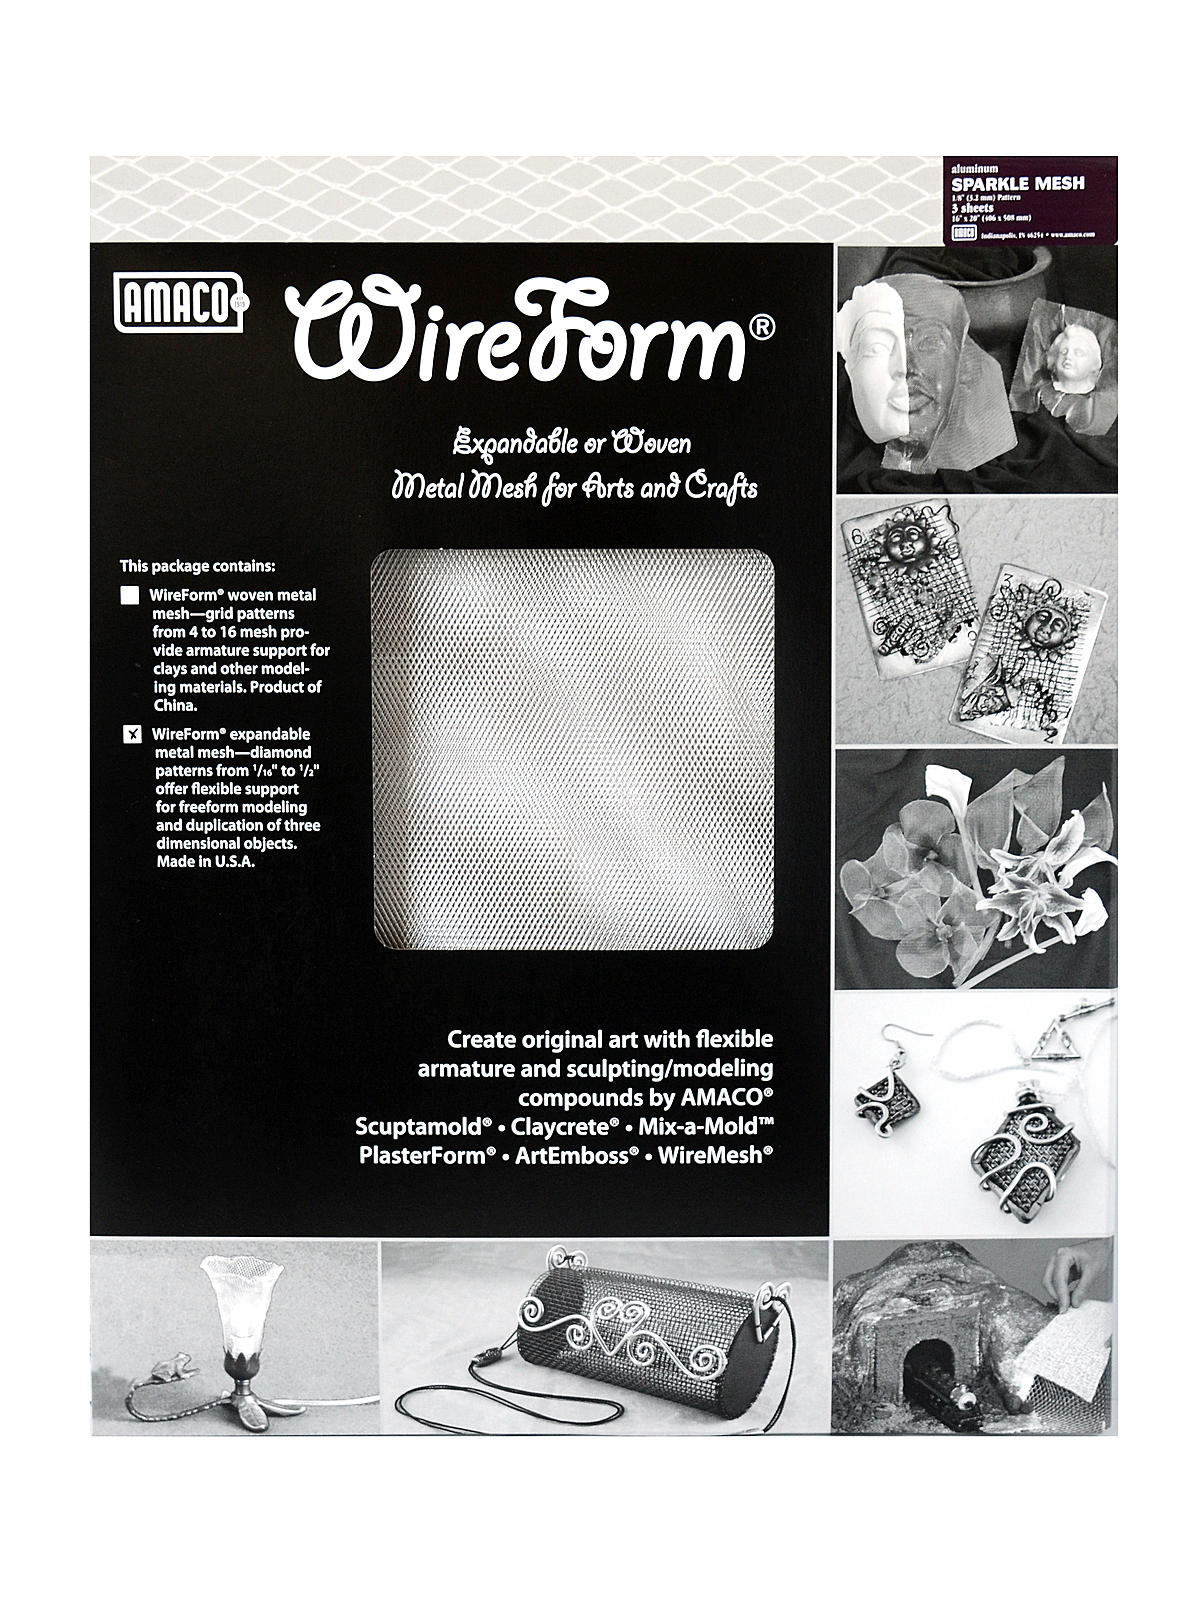 Wireform Metal Mesh Aluminum Woven Sparkle Mesh - 1 8 In. Pattern Pack Of 3 Sheets